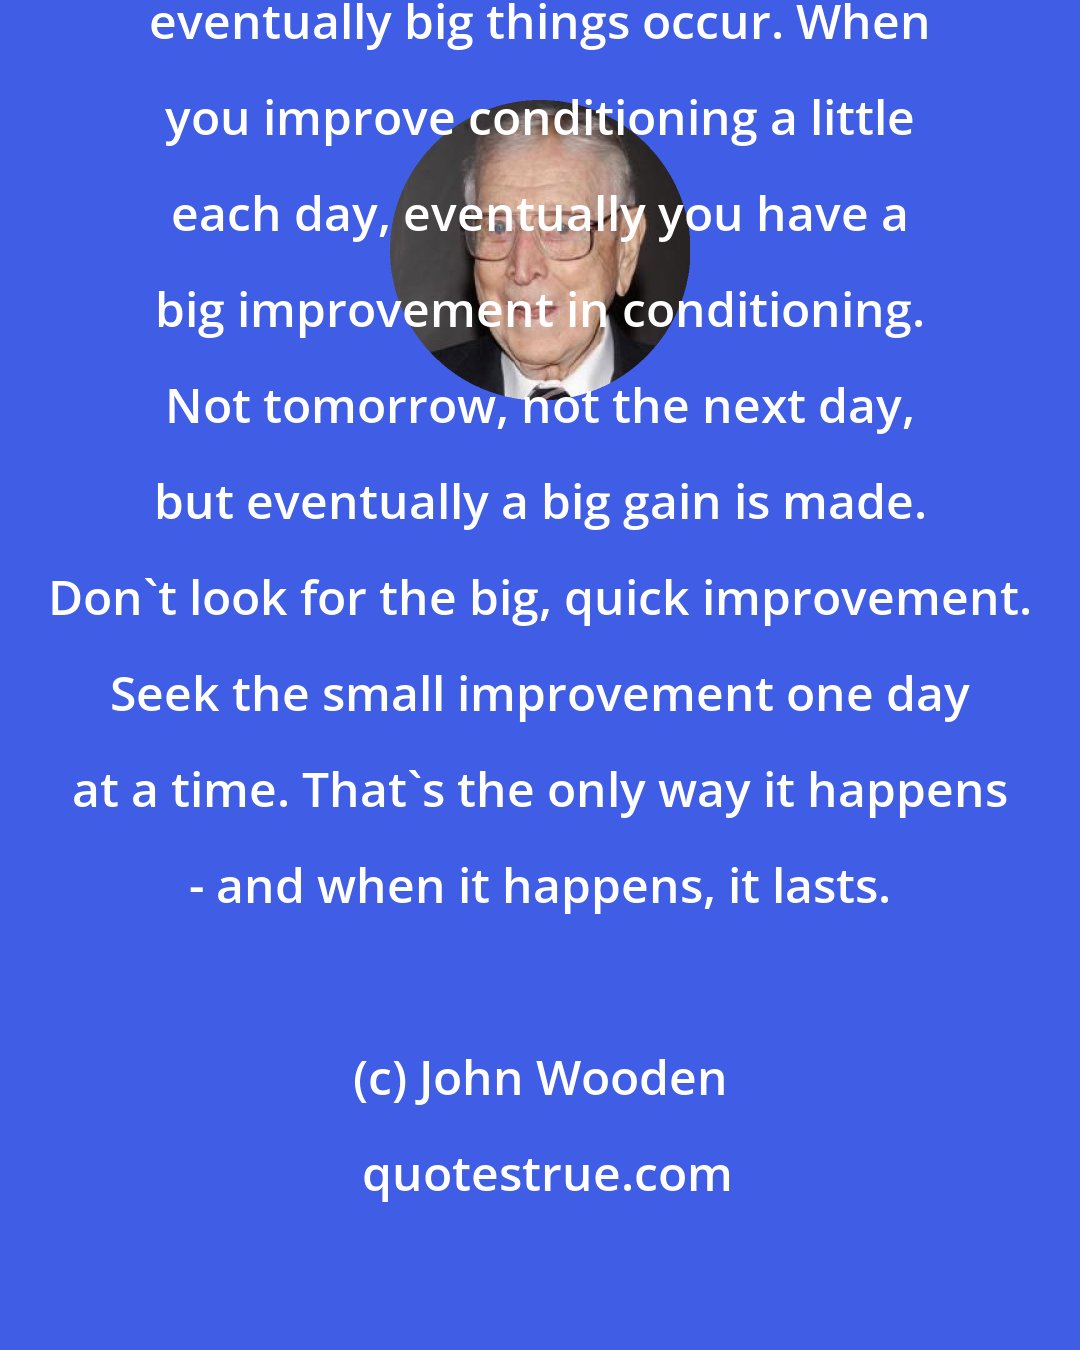 John Wooden: When you improve a little each day, eventually big things occur. When you improve conditioning a little each day, eventually you have a big improvement in conditioning. Not tomorrow, not the next day, but eventually a big gain is made. Don't look for the big, quick improvement. Seek the small improvement one day at a time. That's the only way it happens - and when it happens, it lasts.